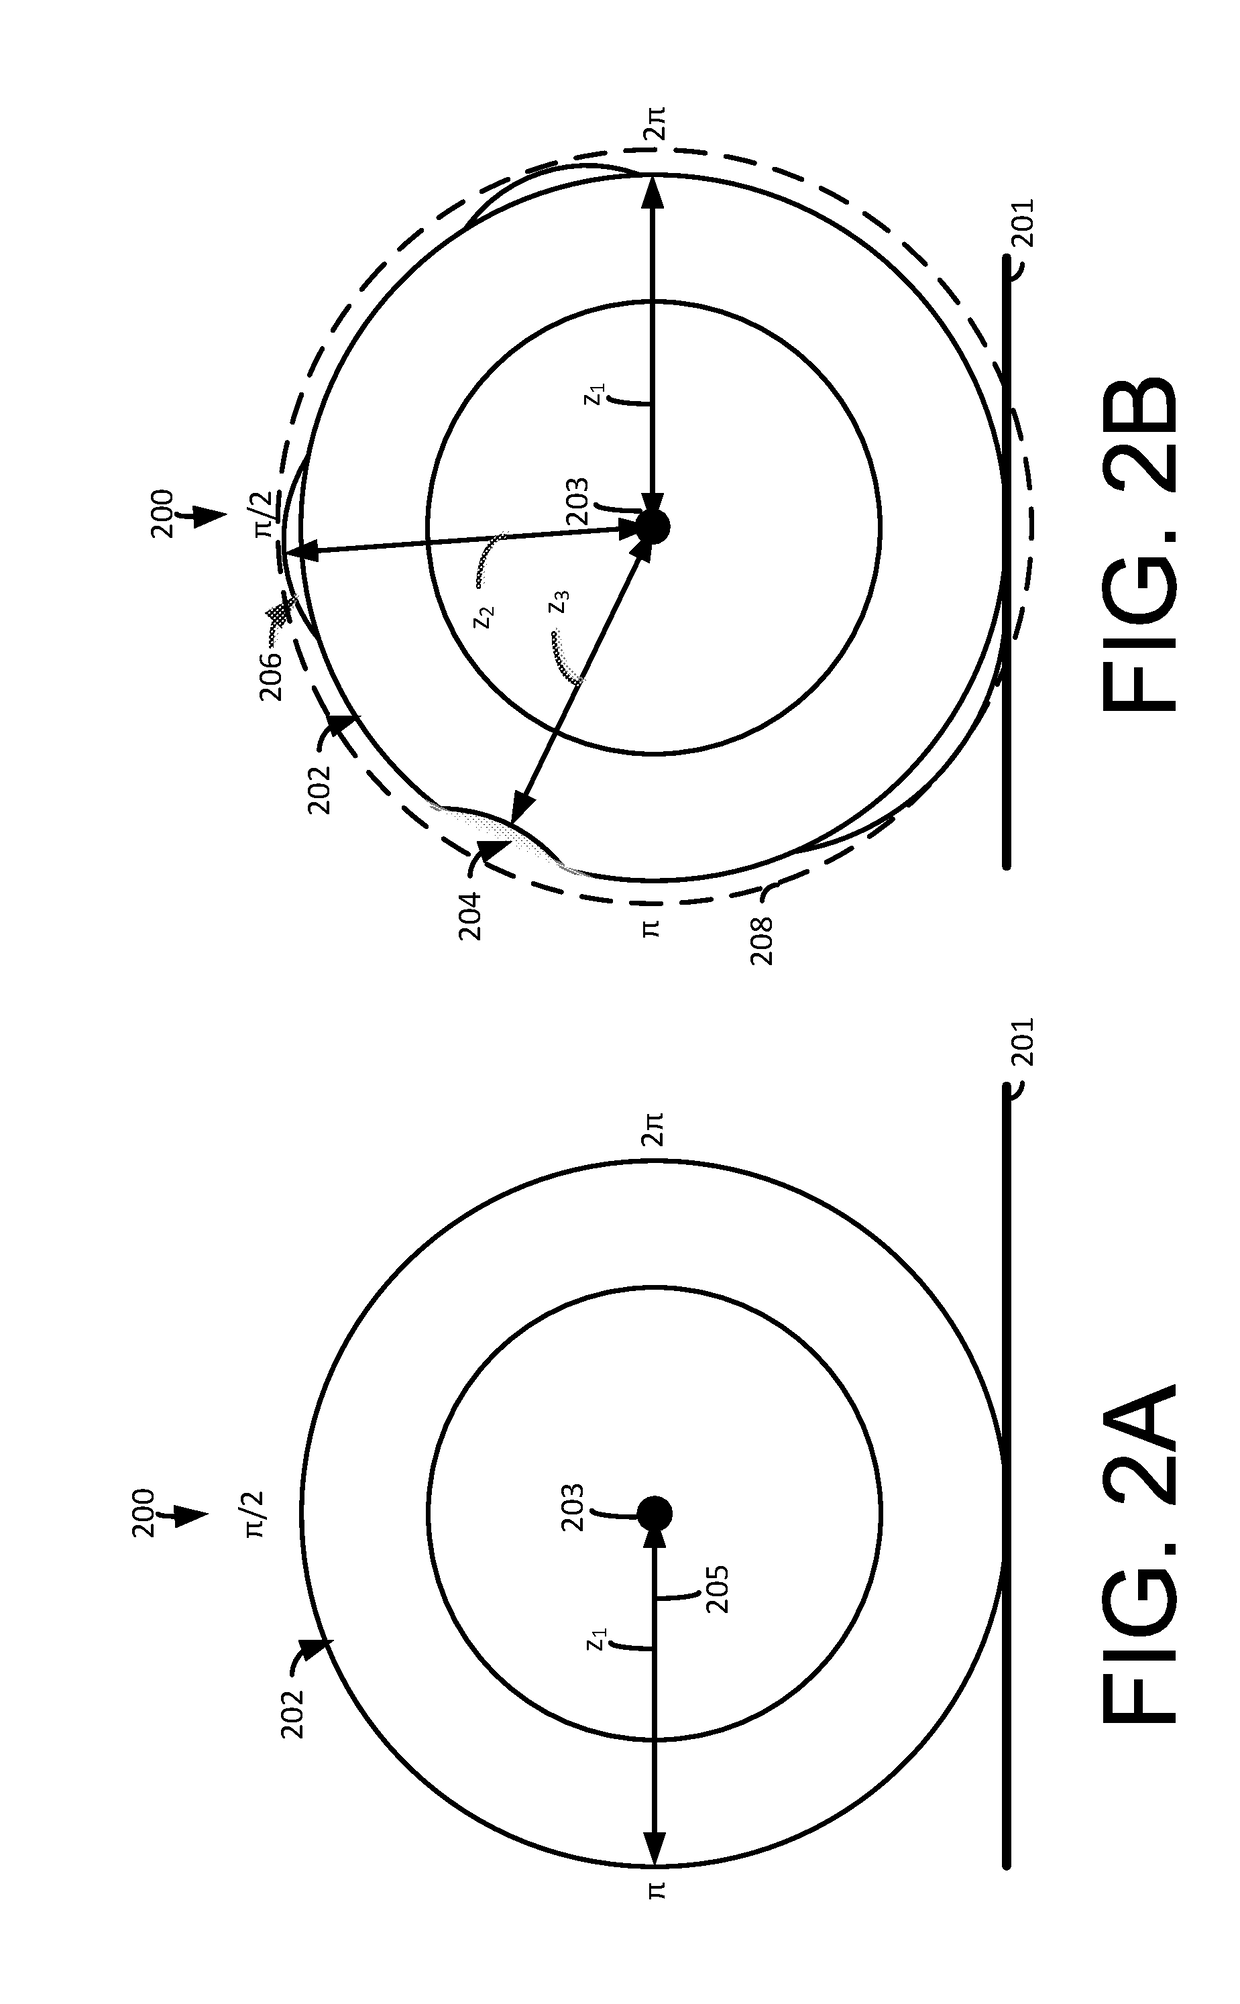 Tires for testing force variation sensitivity in a vehicle